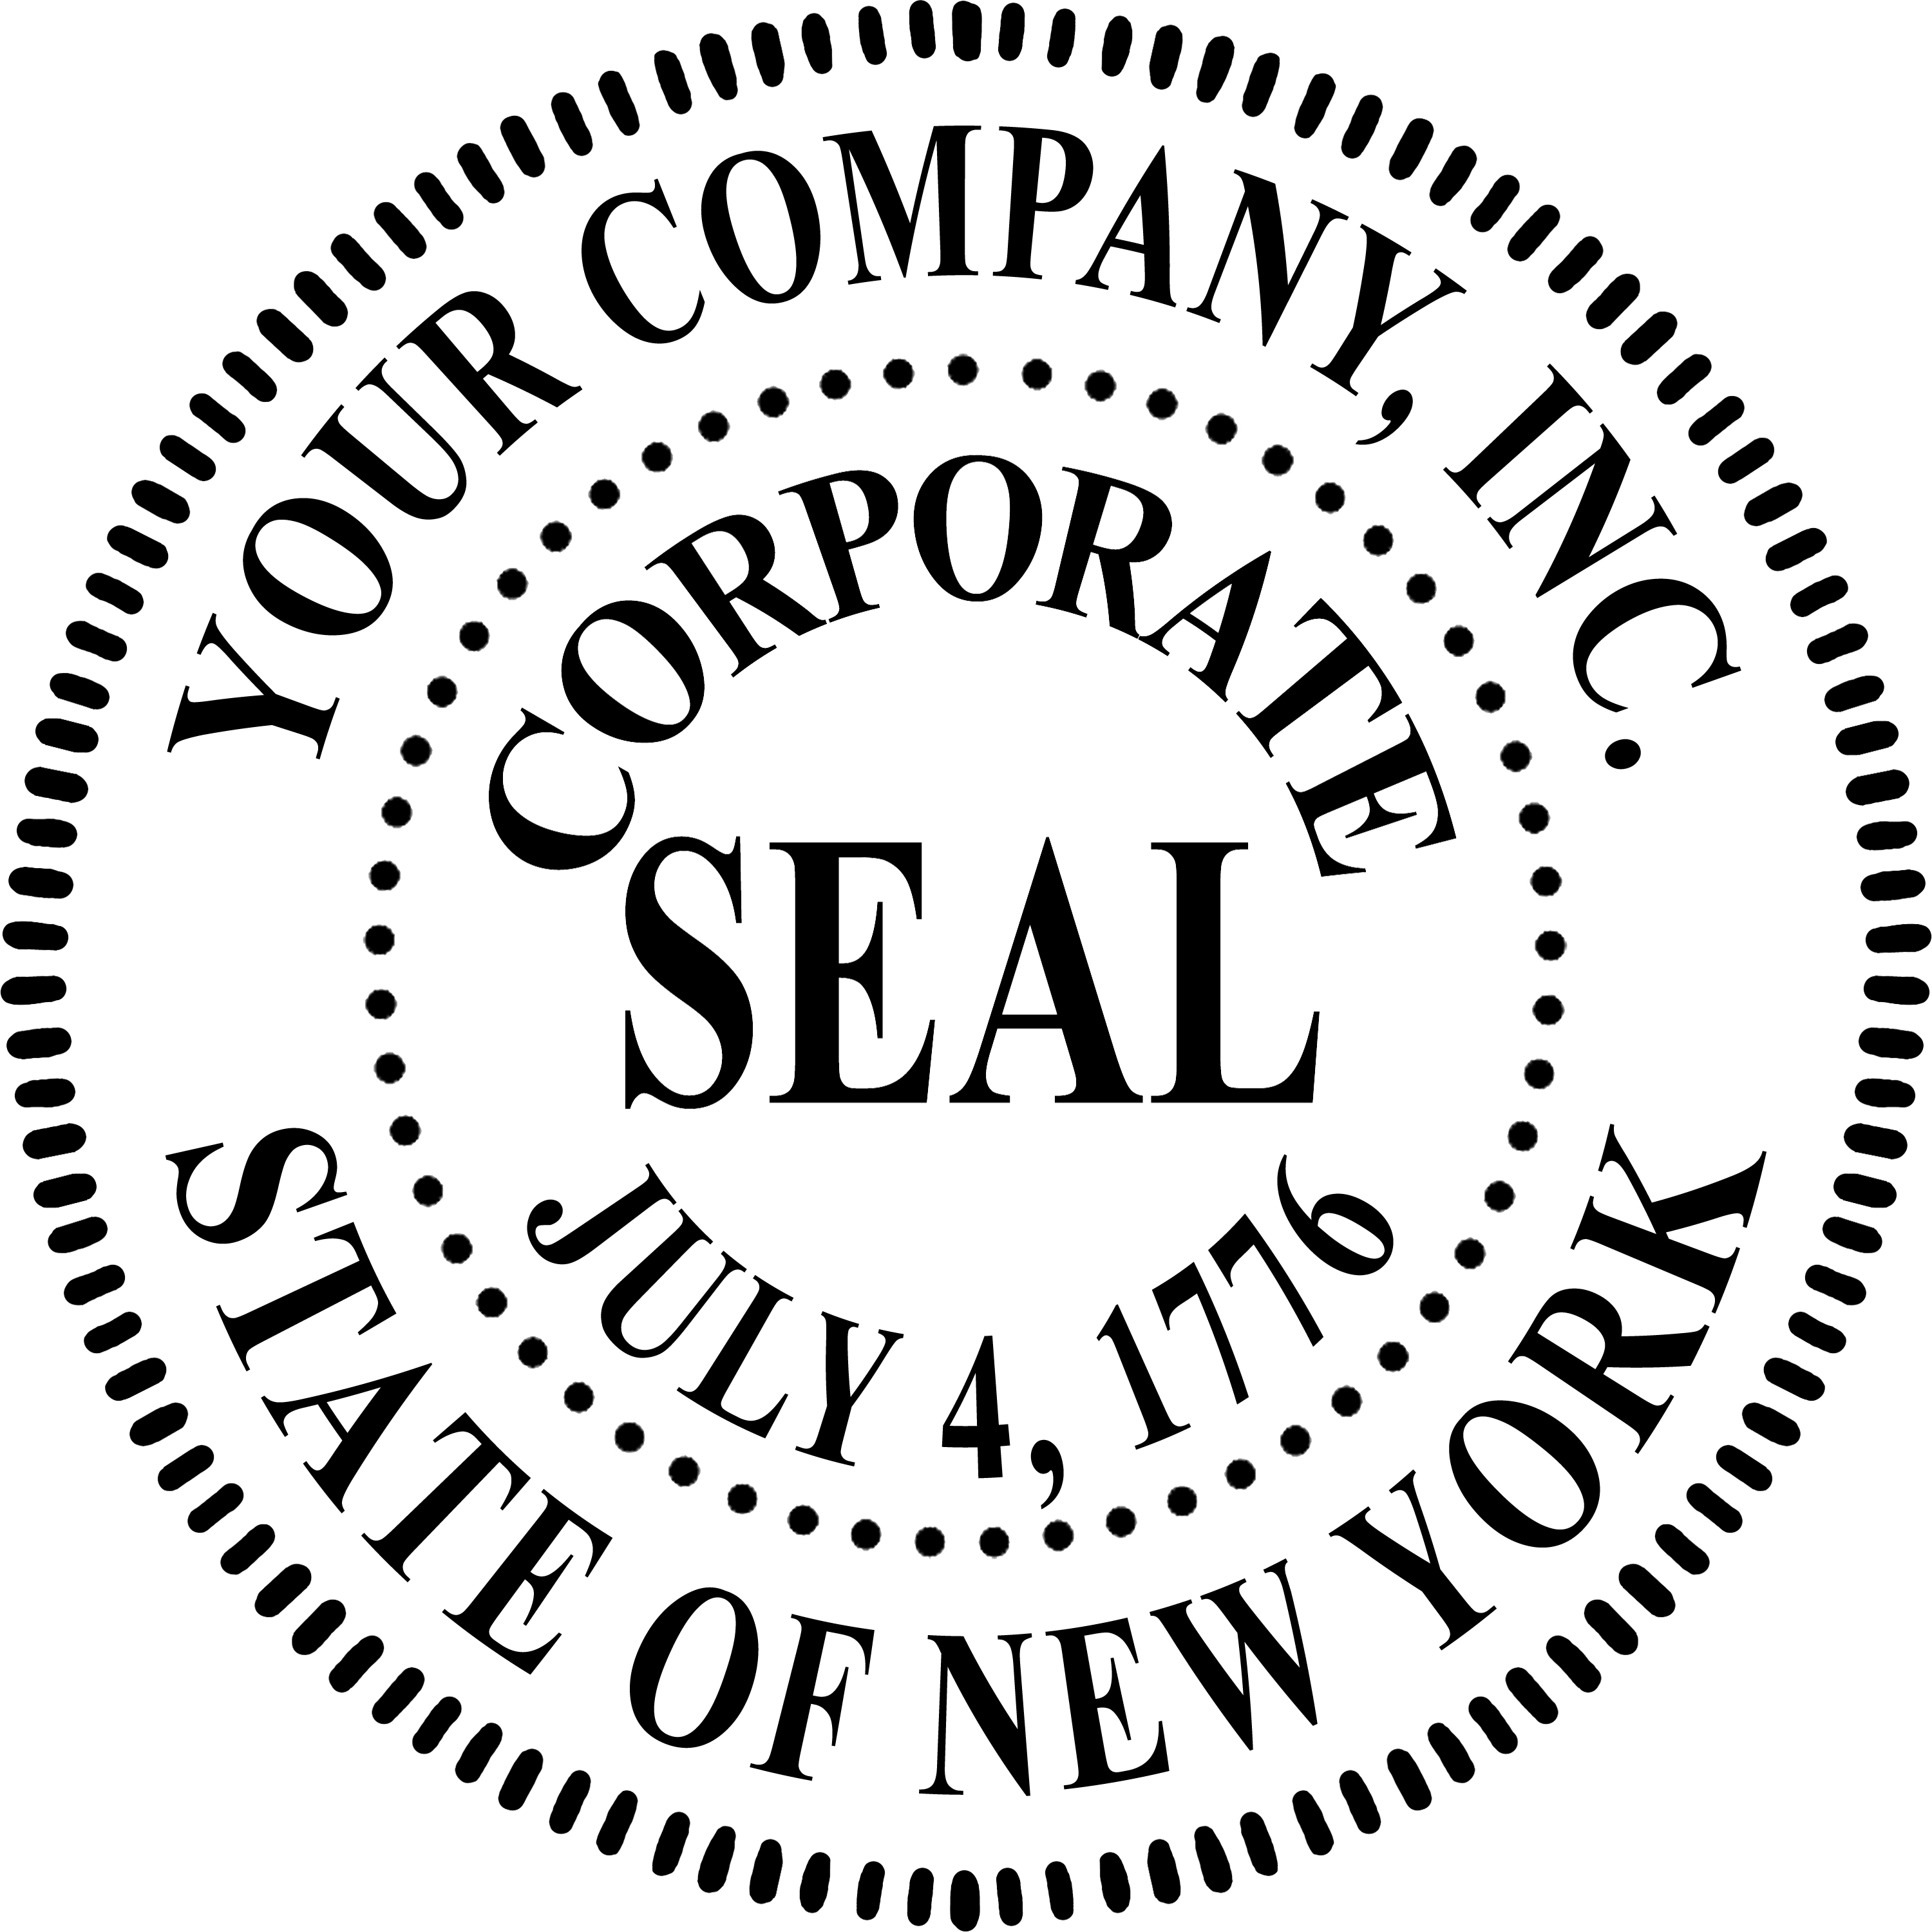 Corporate Seal Stamp Template Designs